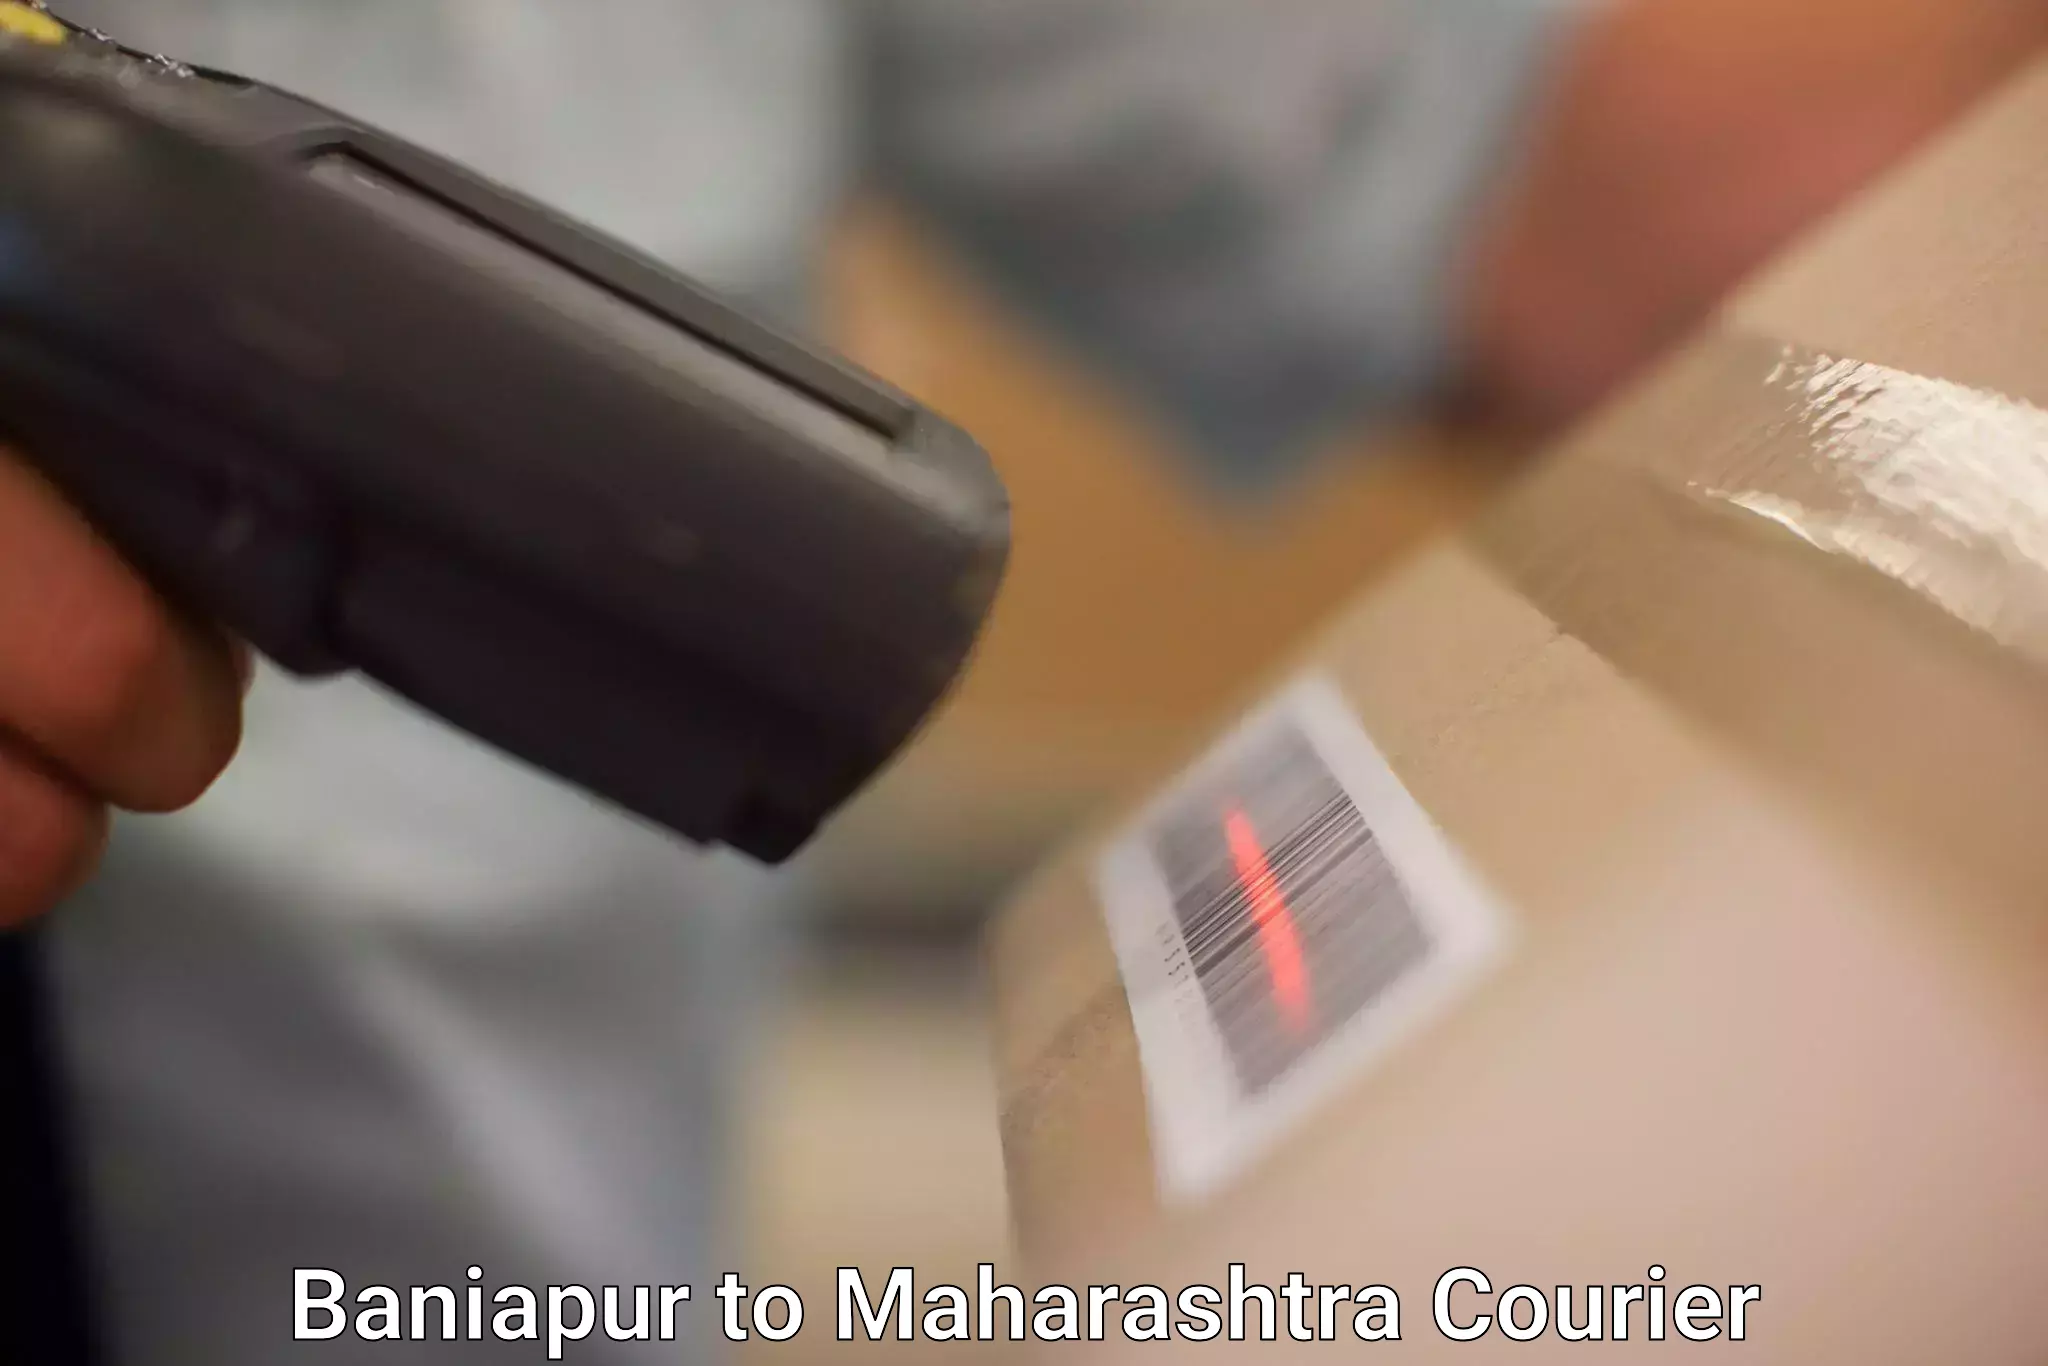 Express package delivery in Baniapur to Tata Institute of Social Sciences Mumbai